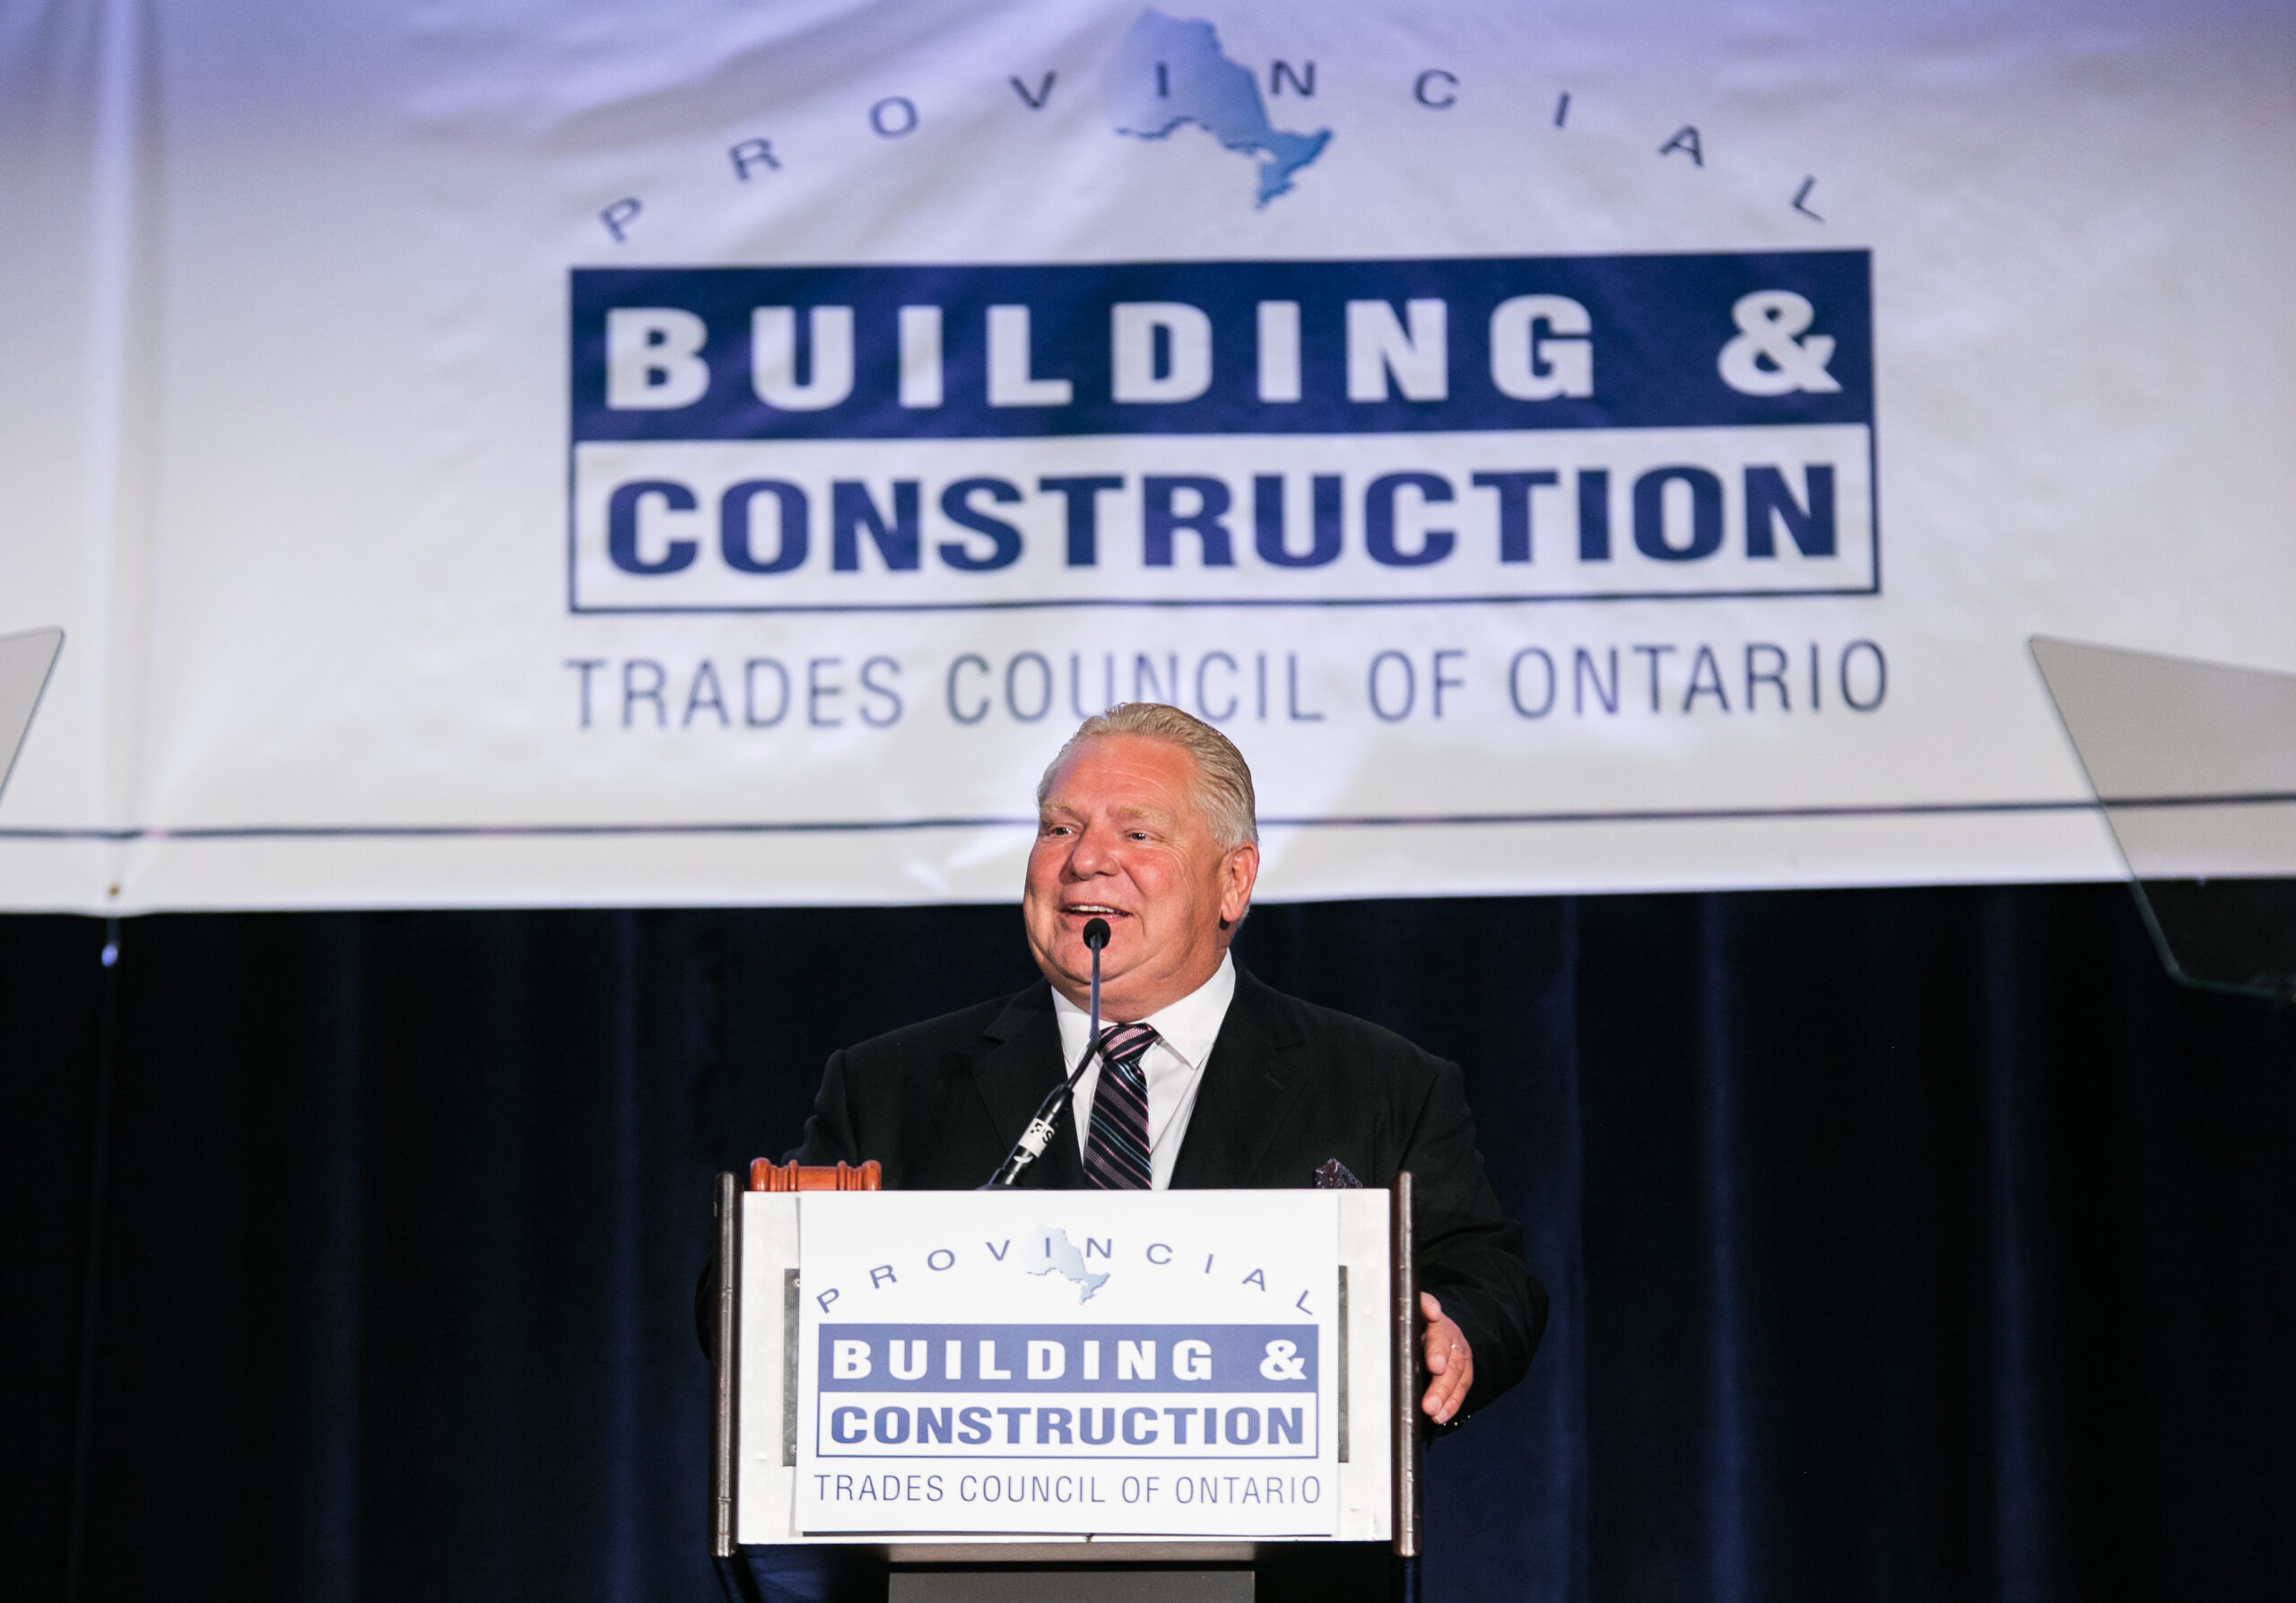 Premier Doug Ford smiles as he speaks at a podium for a building and construction industry event. 